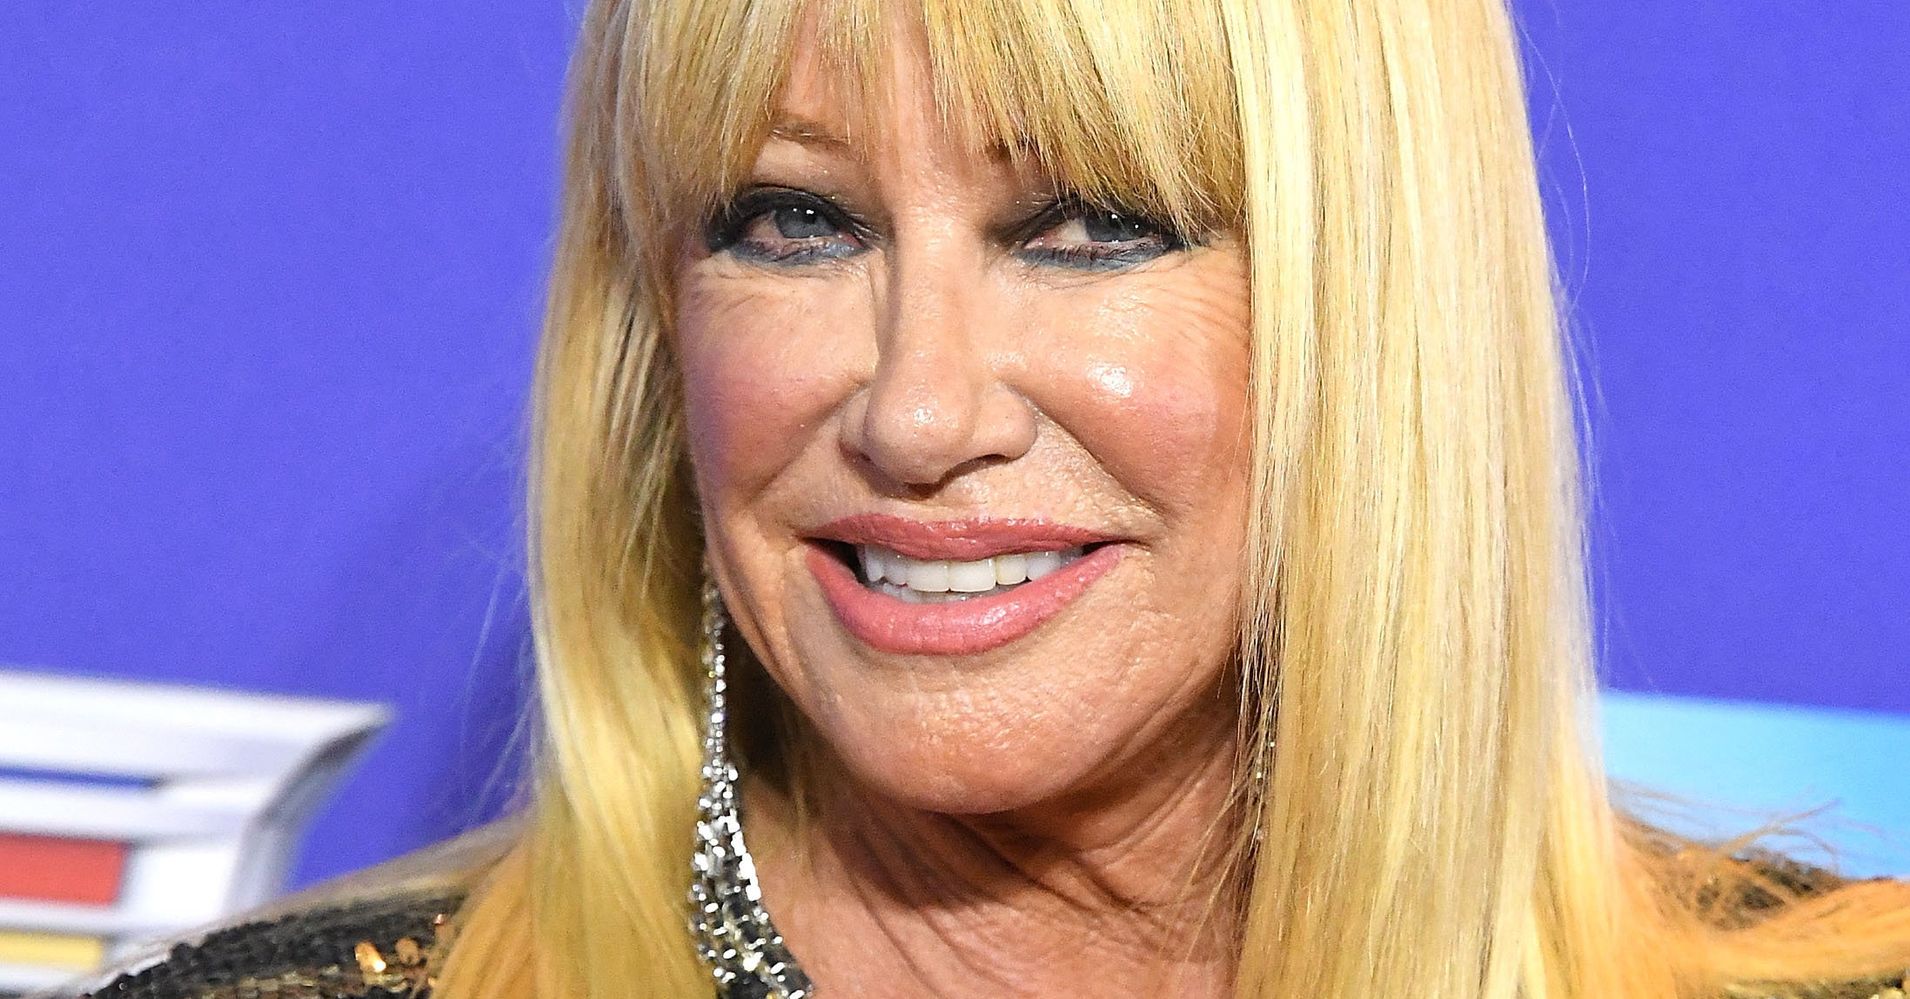 Suzanne Somers Says She's 'Happy' About Trump | HuffPost